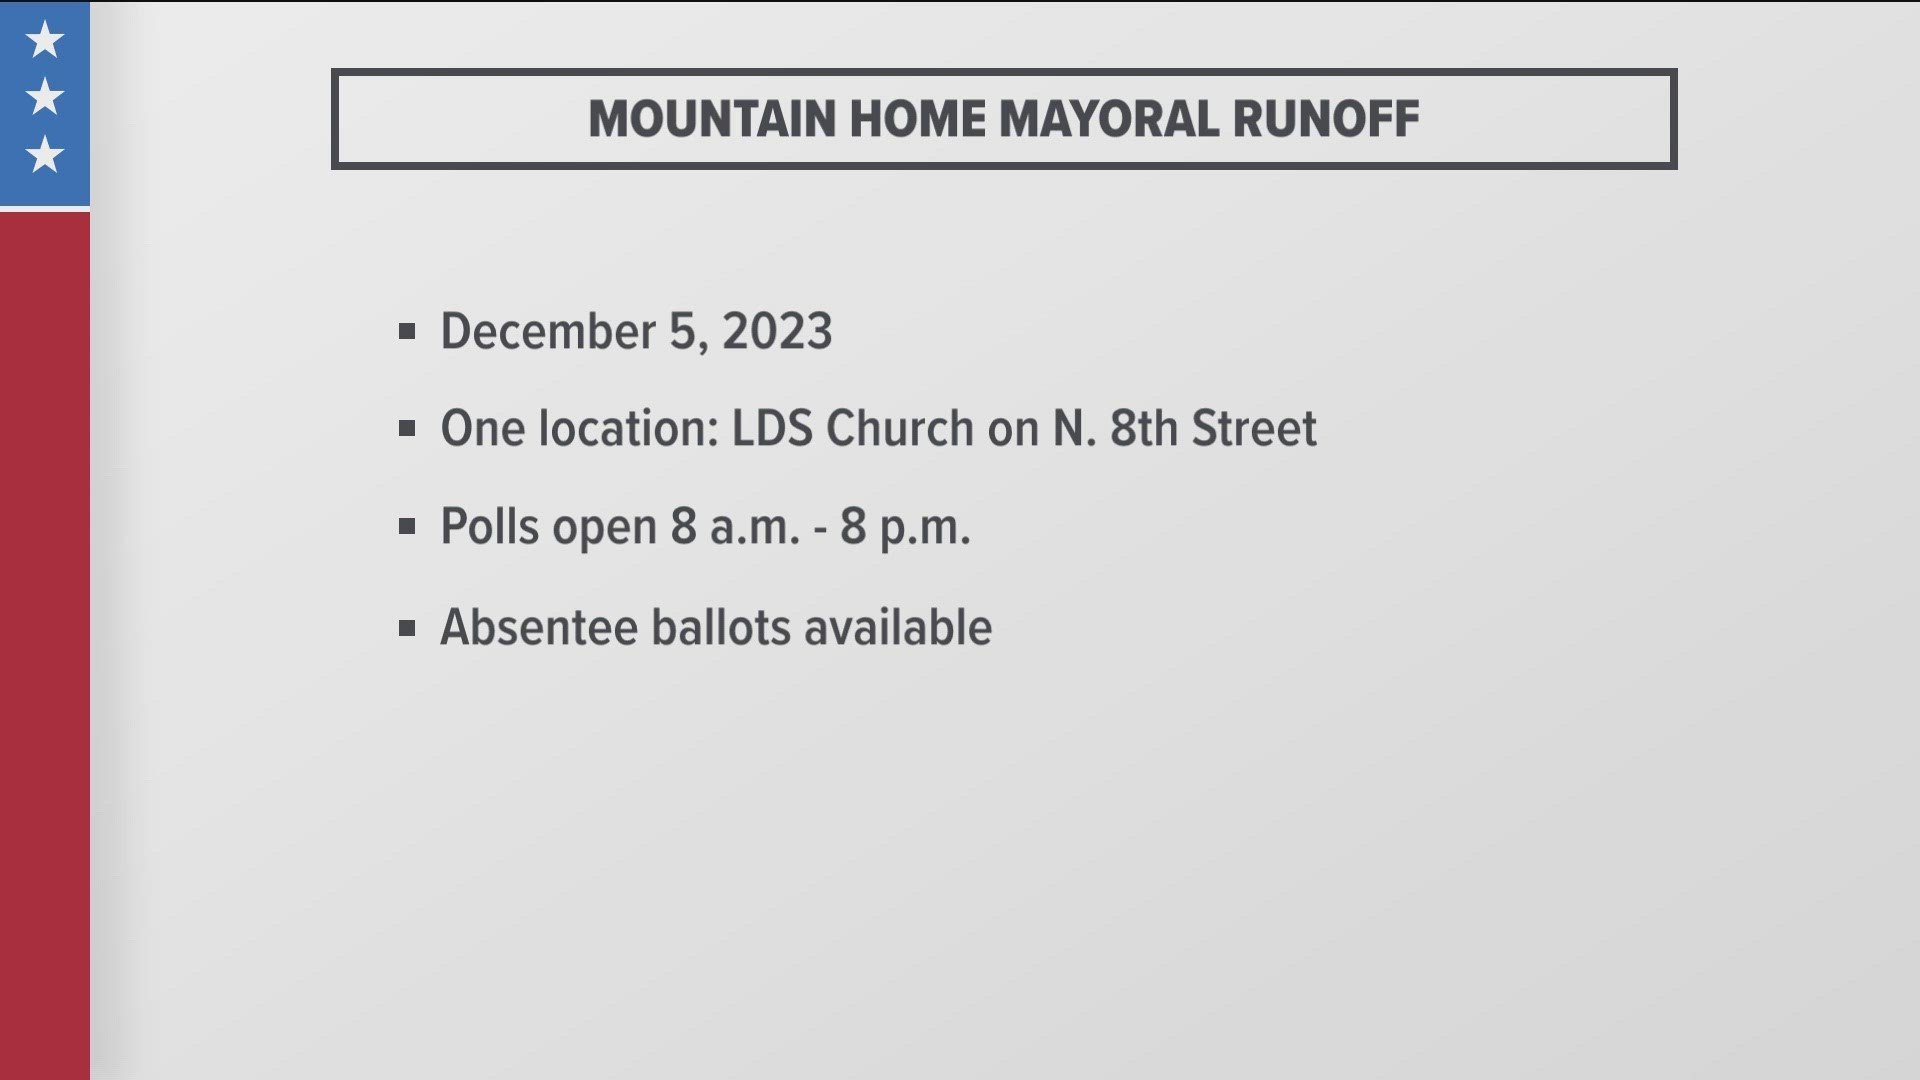 The runoff election will be held for Mountain Home mayor on Dec. 5